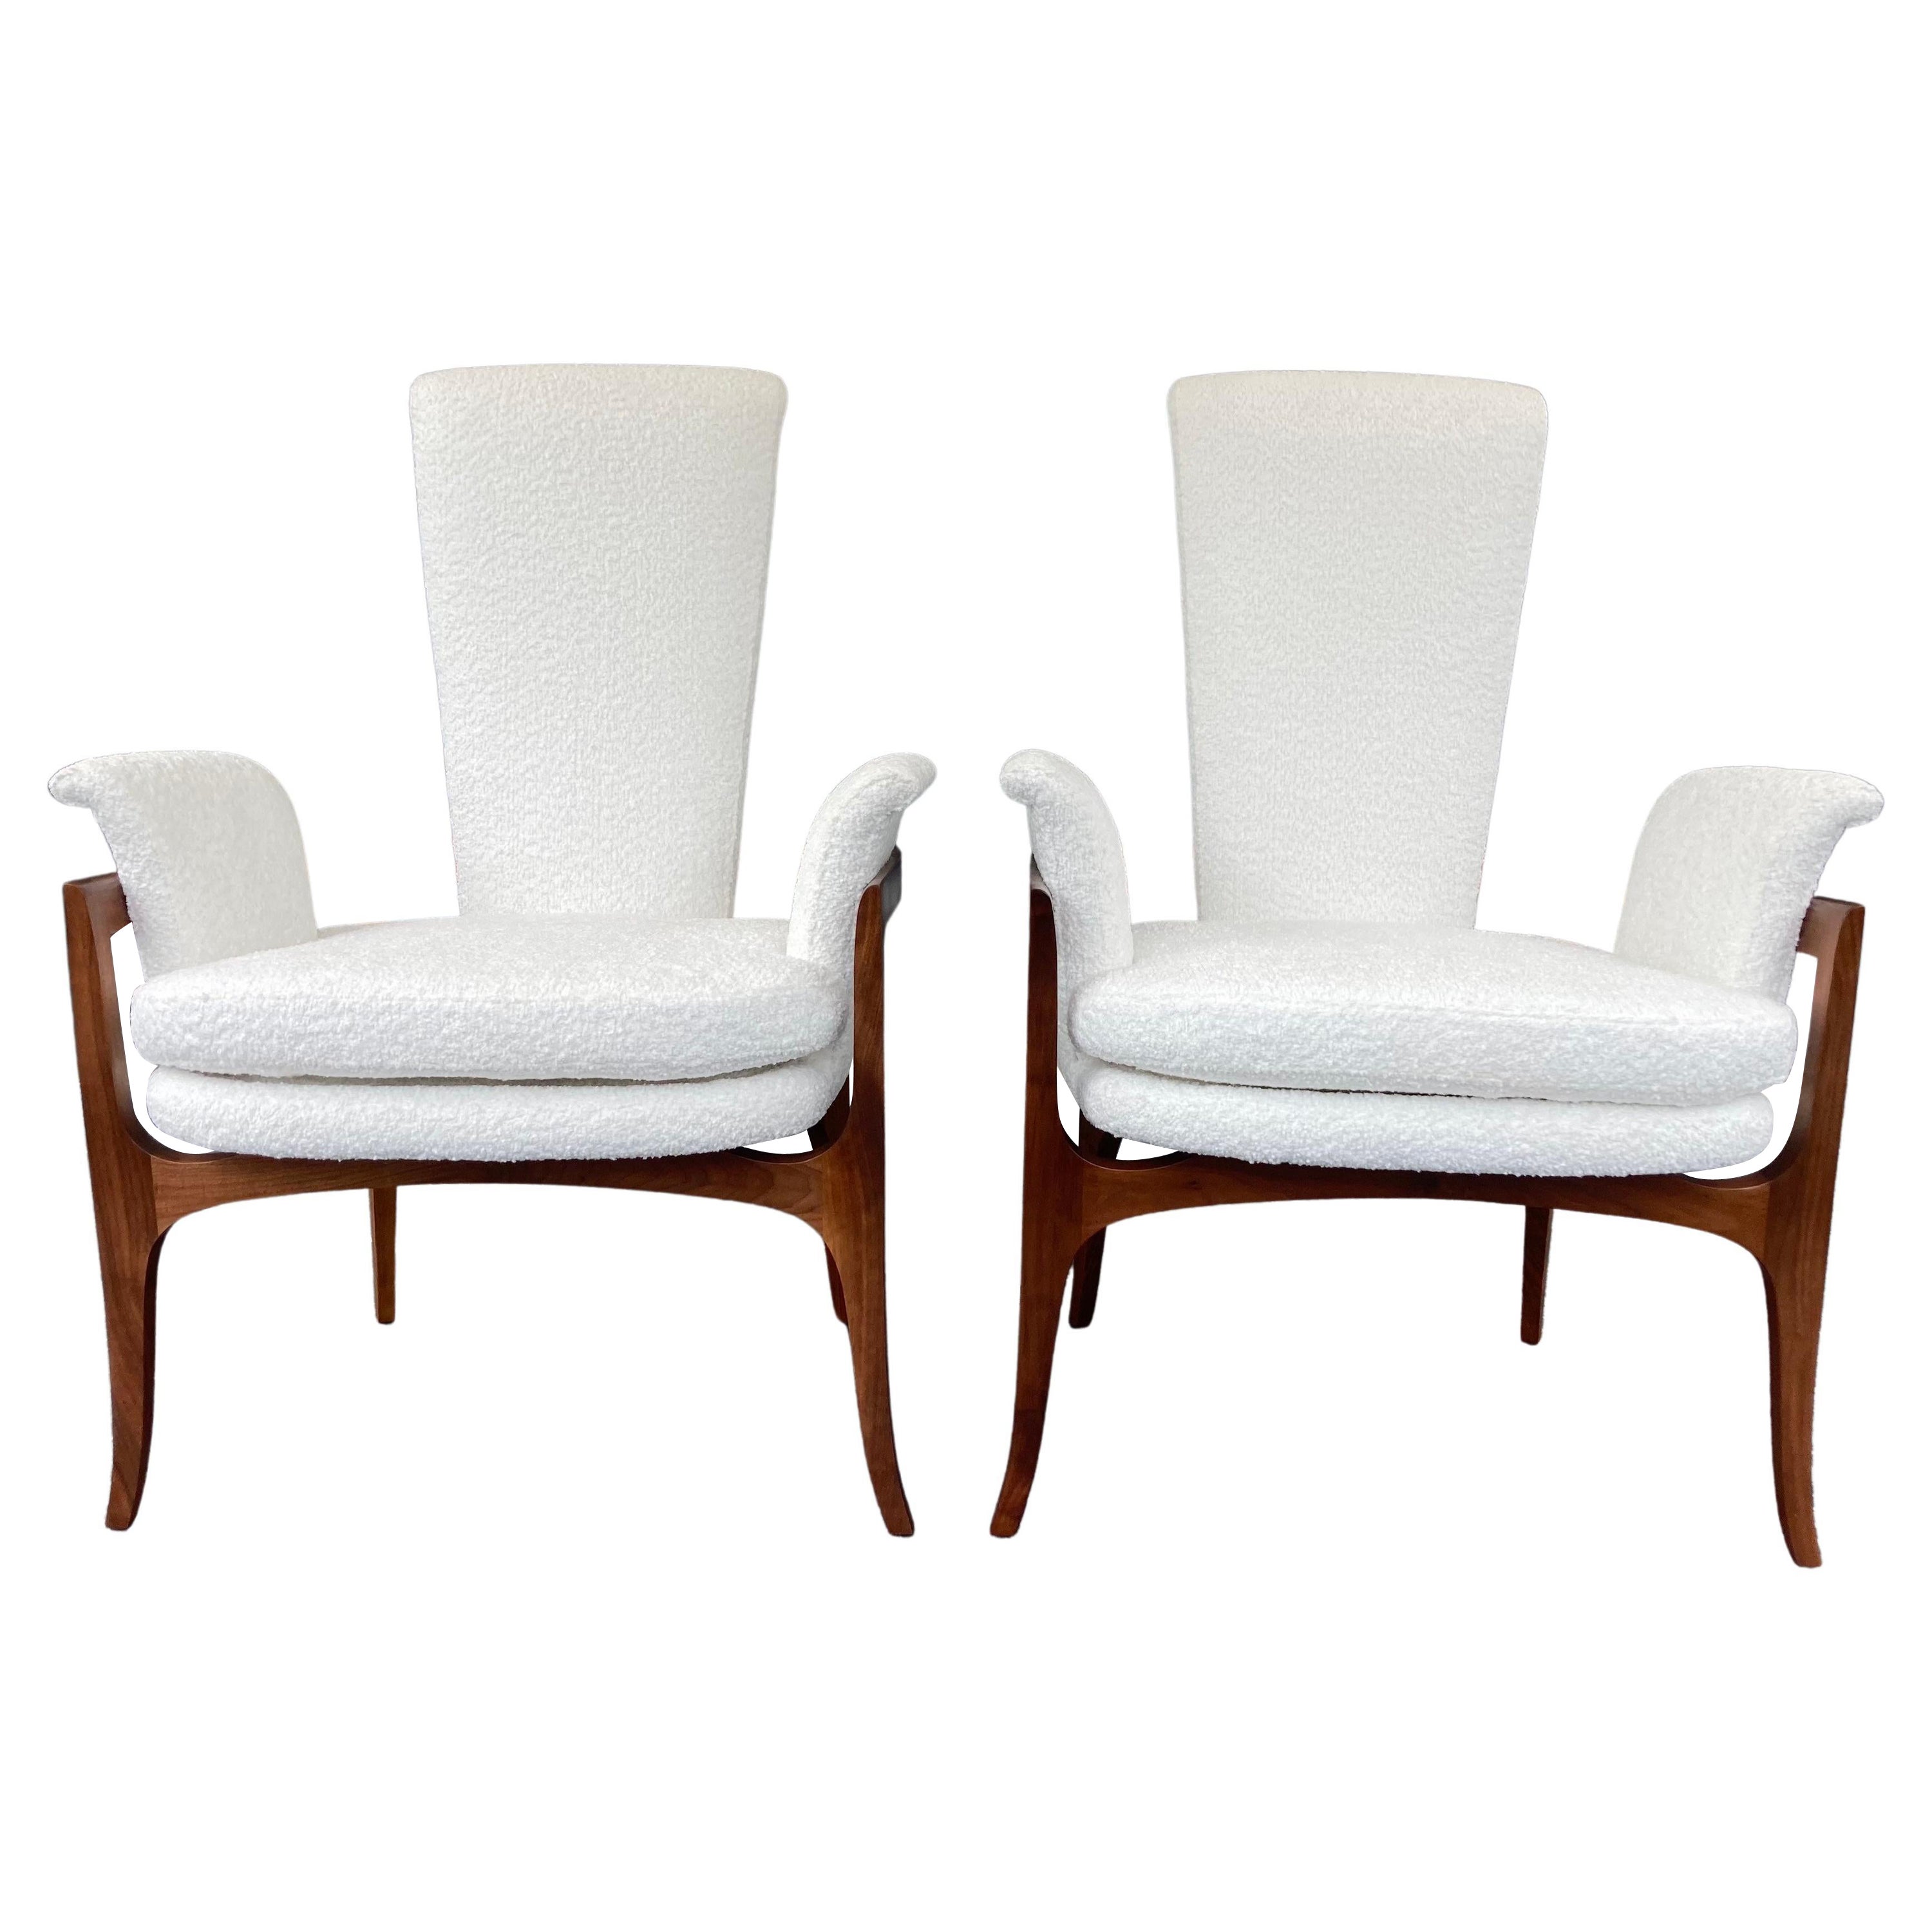 Sculptural Mid-Century Modern Lounge Chairs, Walnut and White Boucle Fabric For Sale